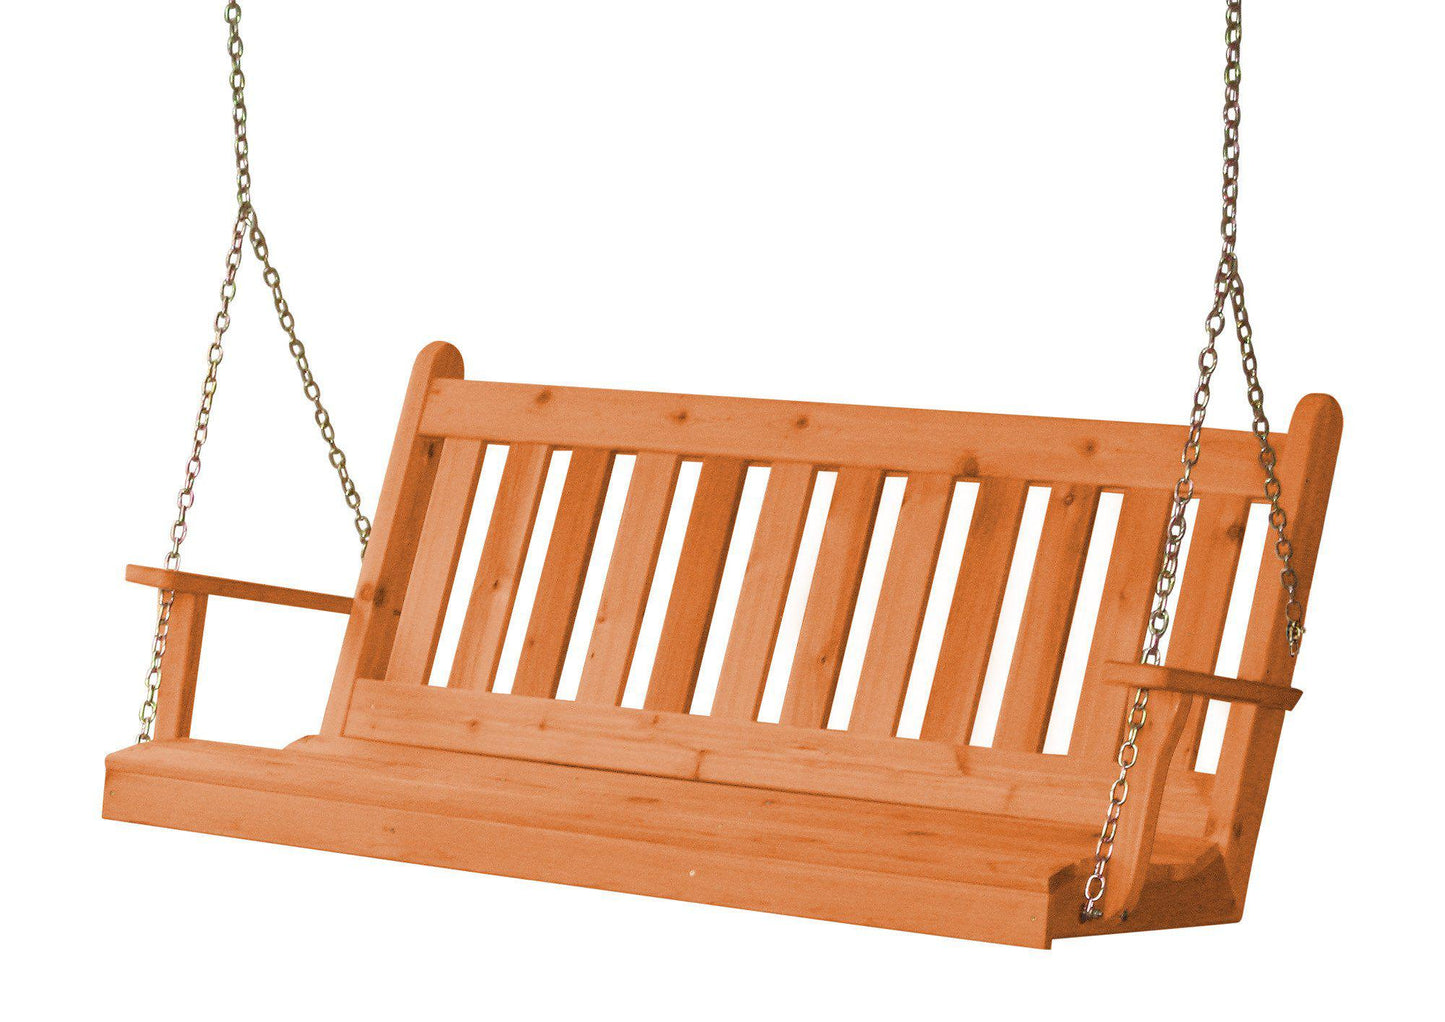 A&L FURNITURE CO. Western Red Cedar 5' Traditional English Swing - LEAD TIME TO SHIP 4 WEEKS OR LESS